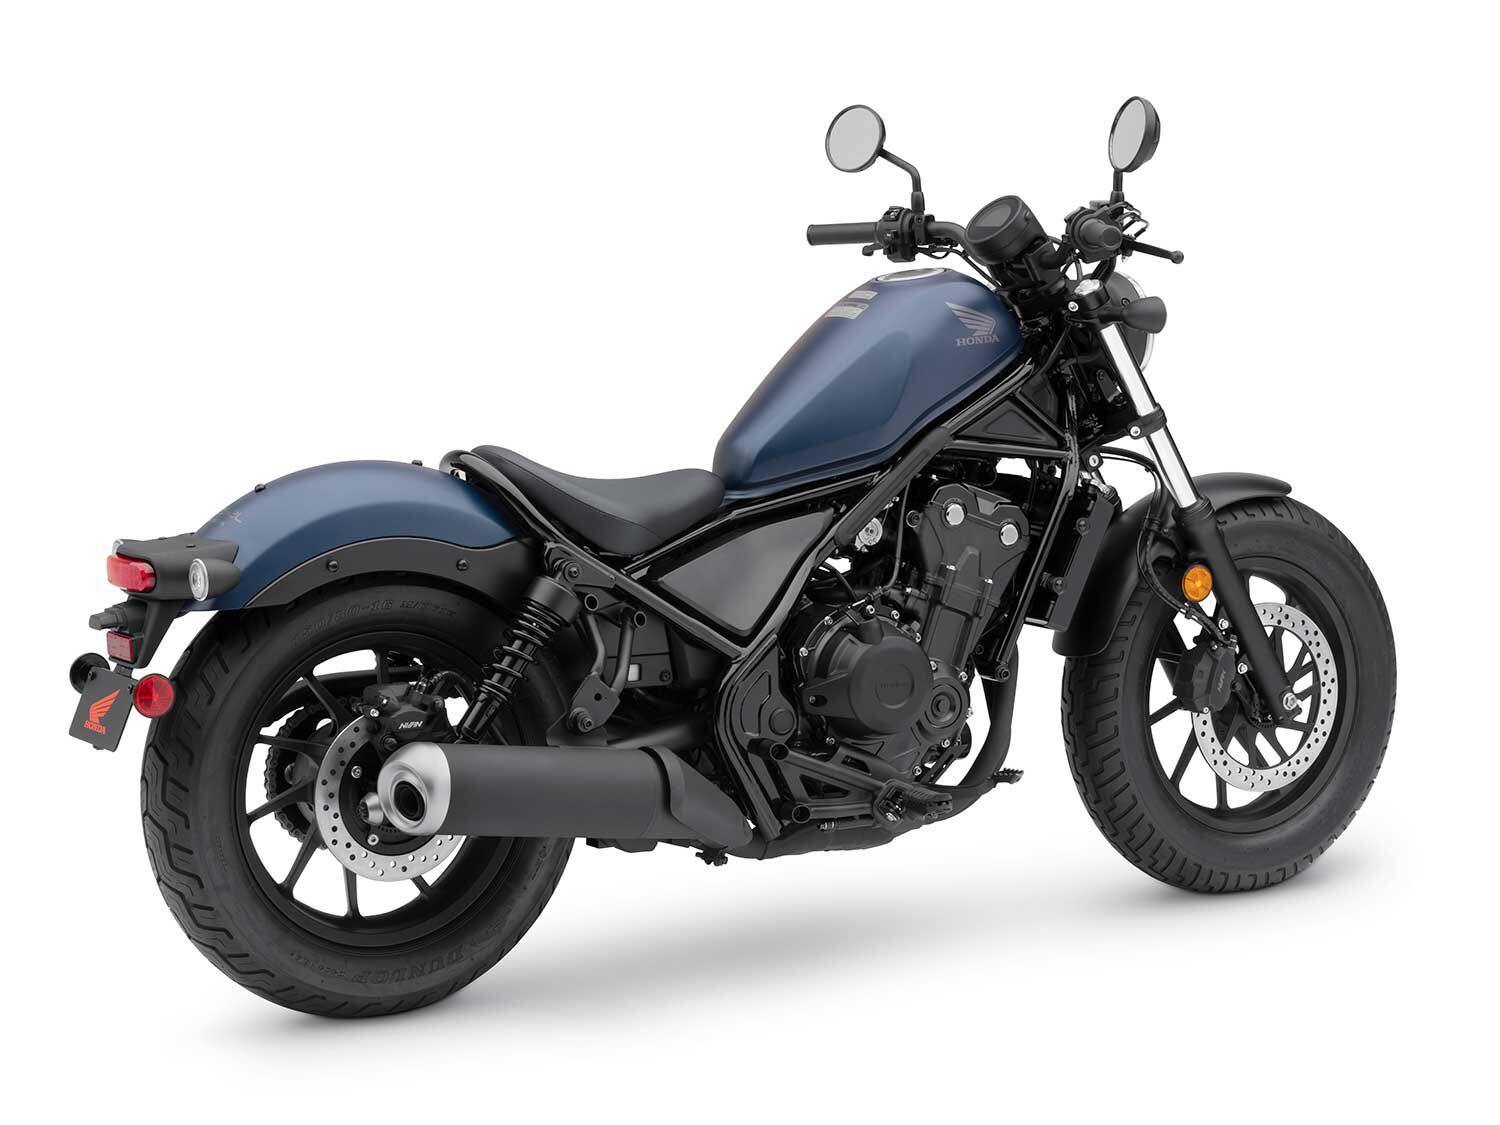 2020 Honda Rebel 300 And 500 Preview Photo Gallery | LaptrinhX